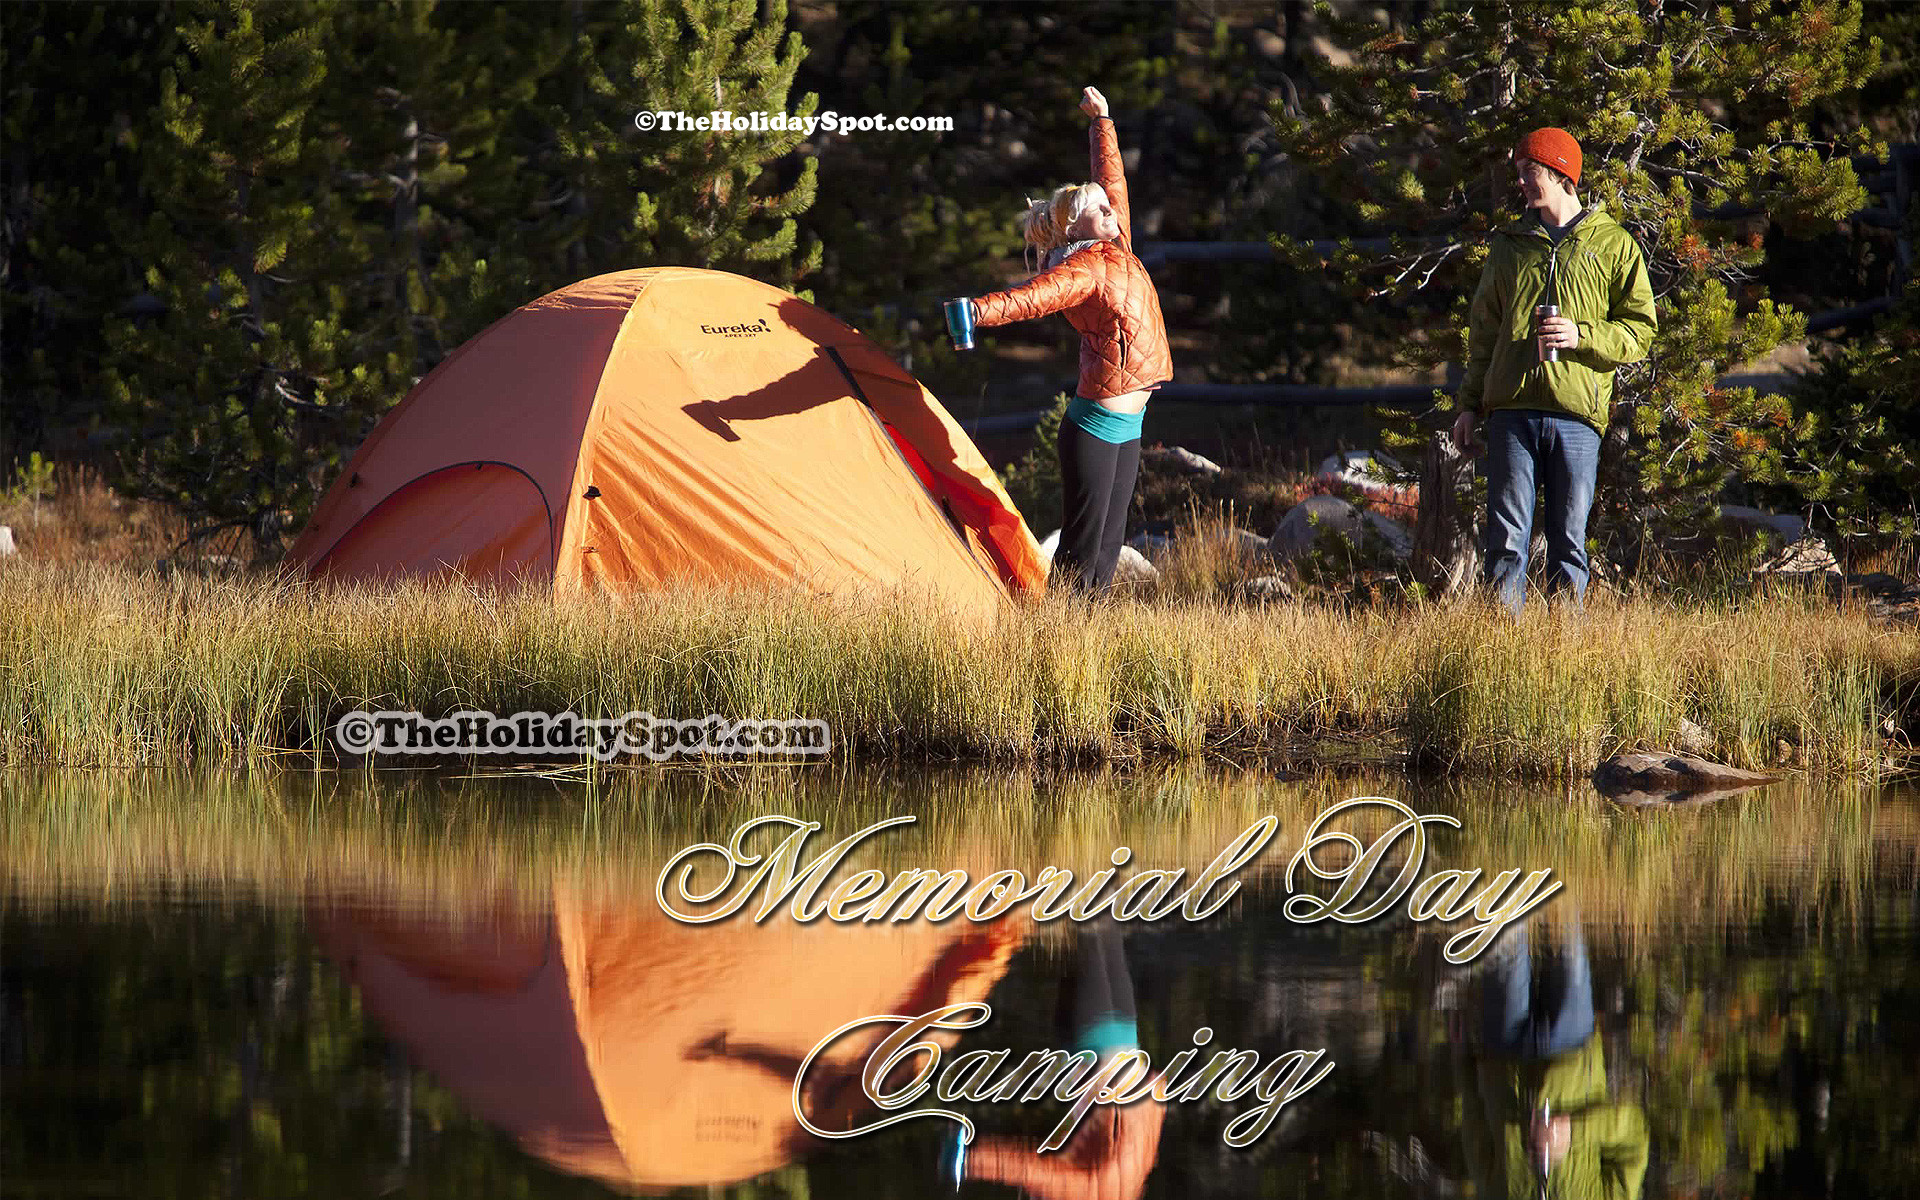 1920x1200 High resolution picture of a couple having fun on camping trip.